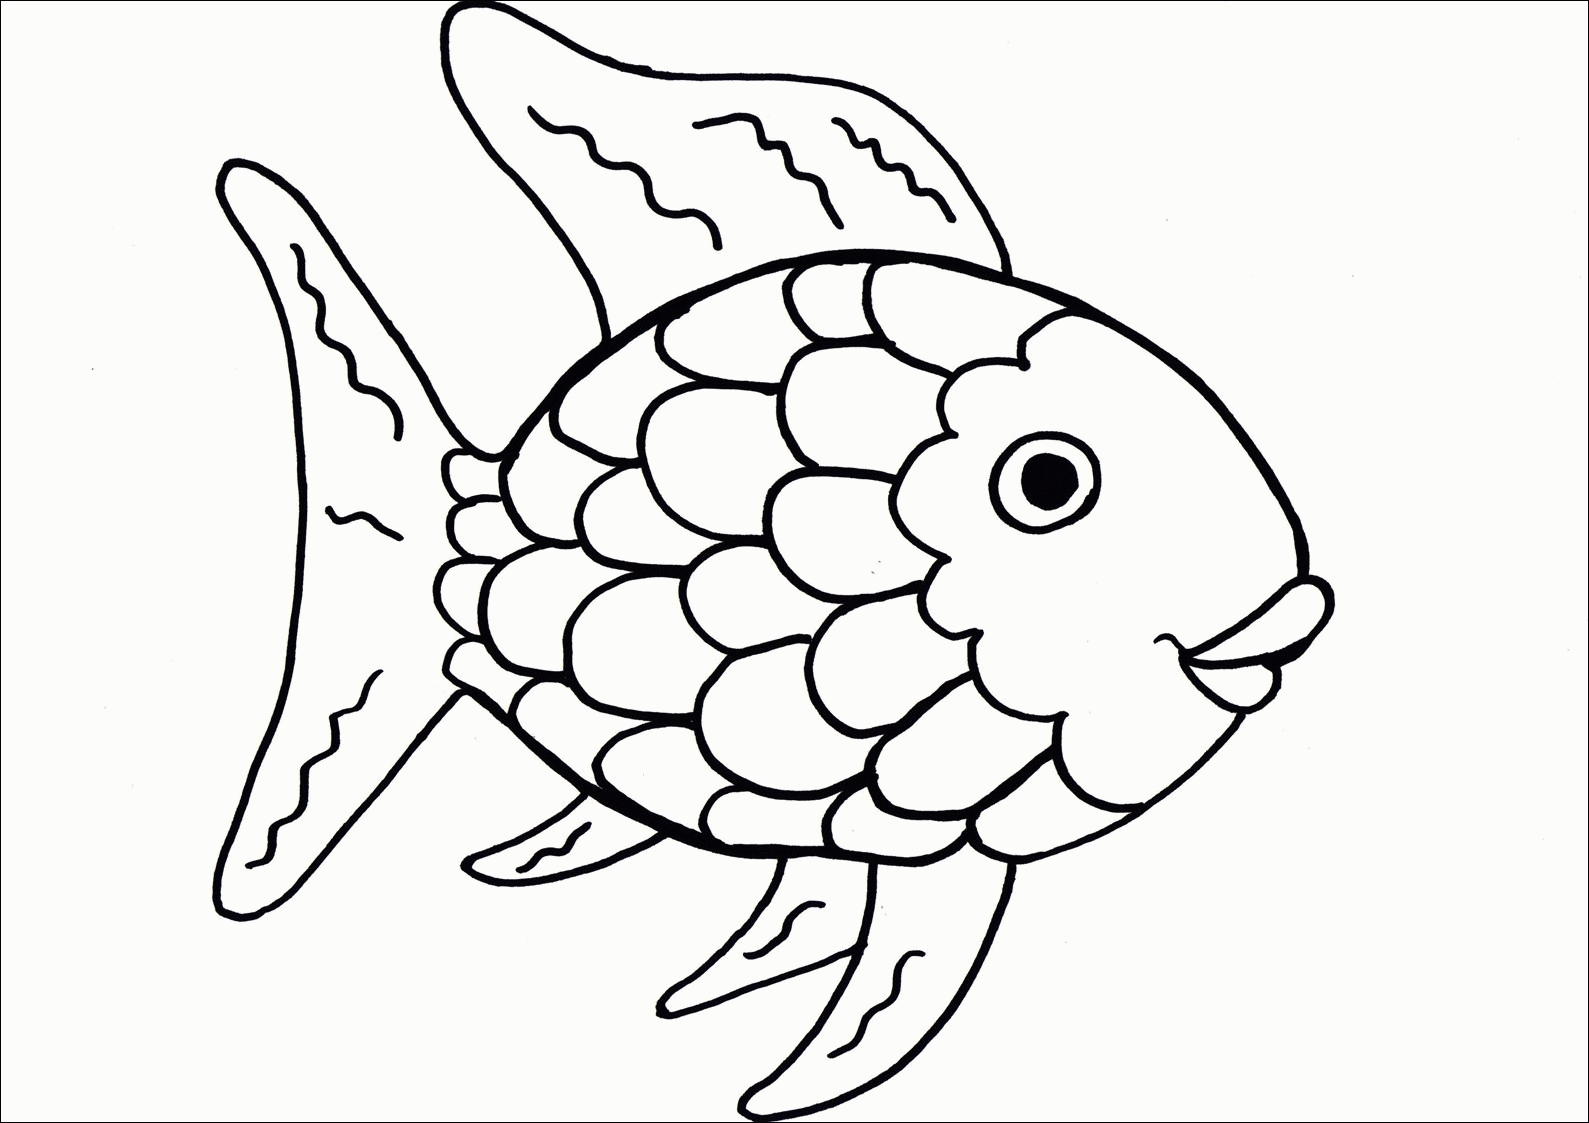 Rainbow Fish Coloring Pages Rainbow fish template